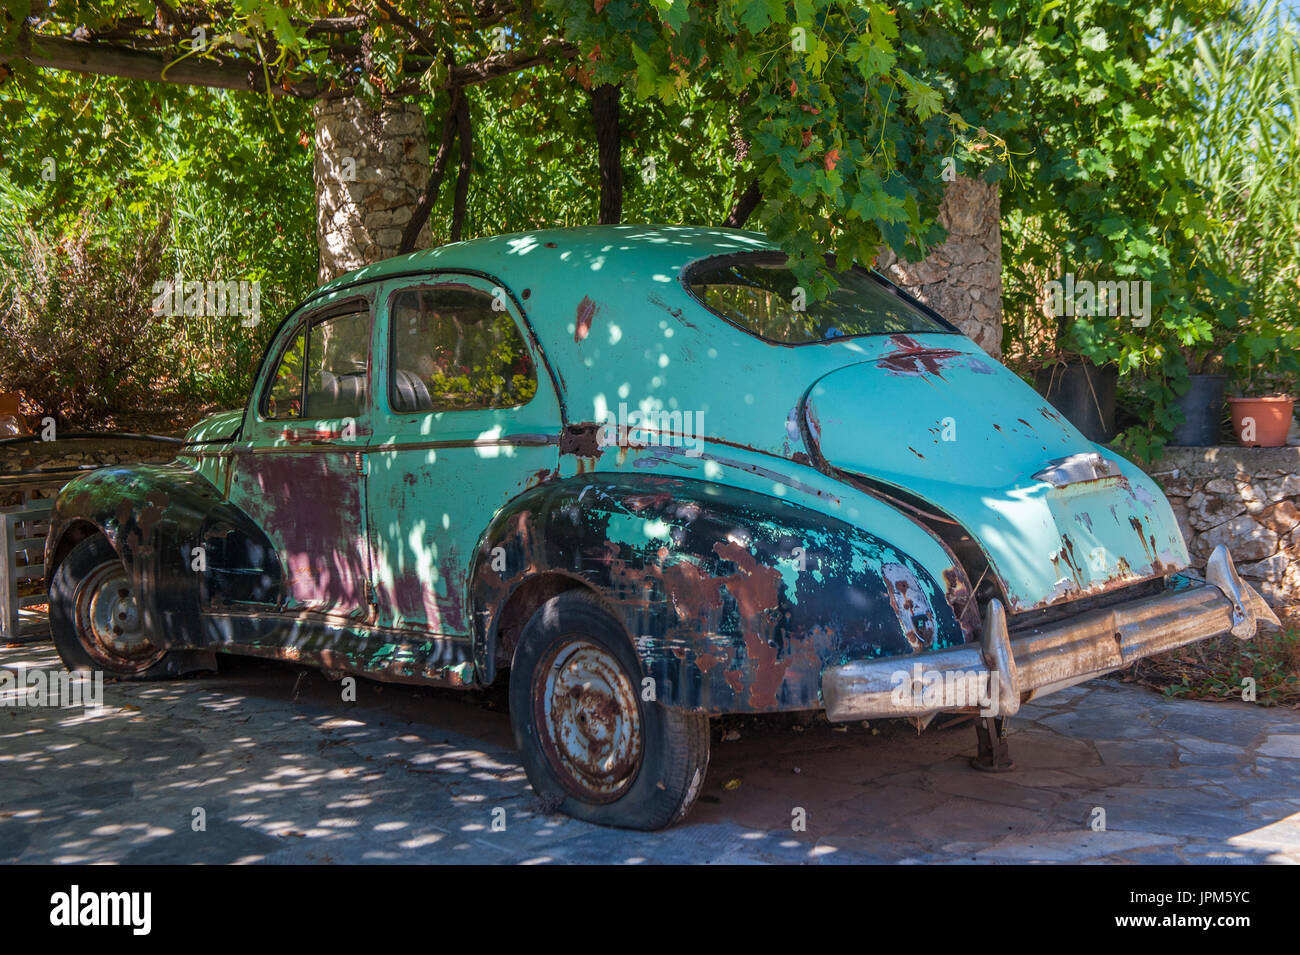 An old Peugeot car under a canopy of vines in a Mediterranean country Stock Photo